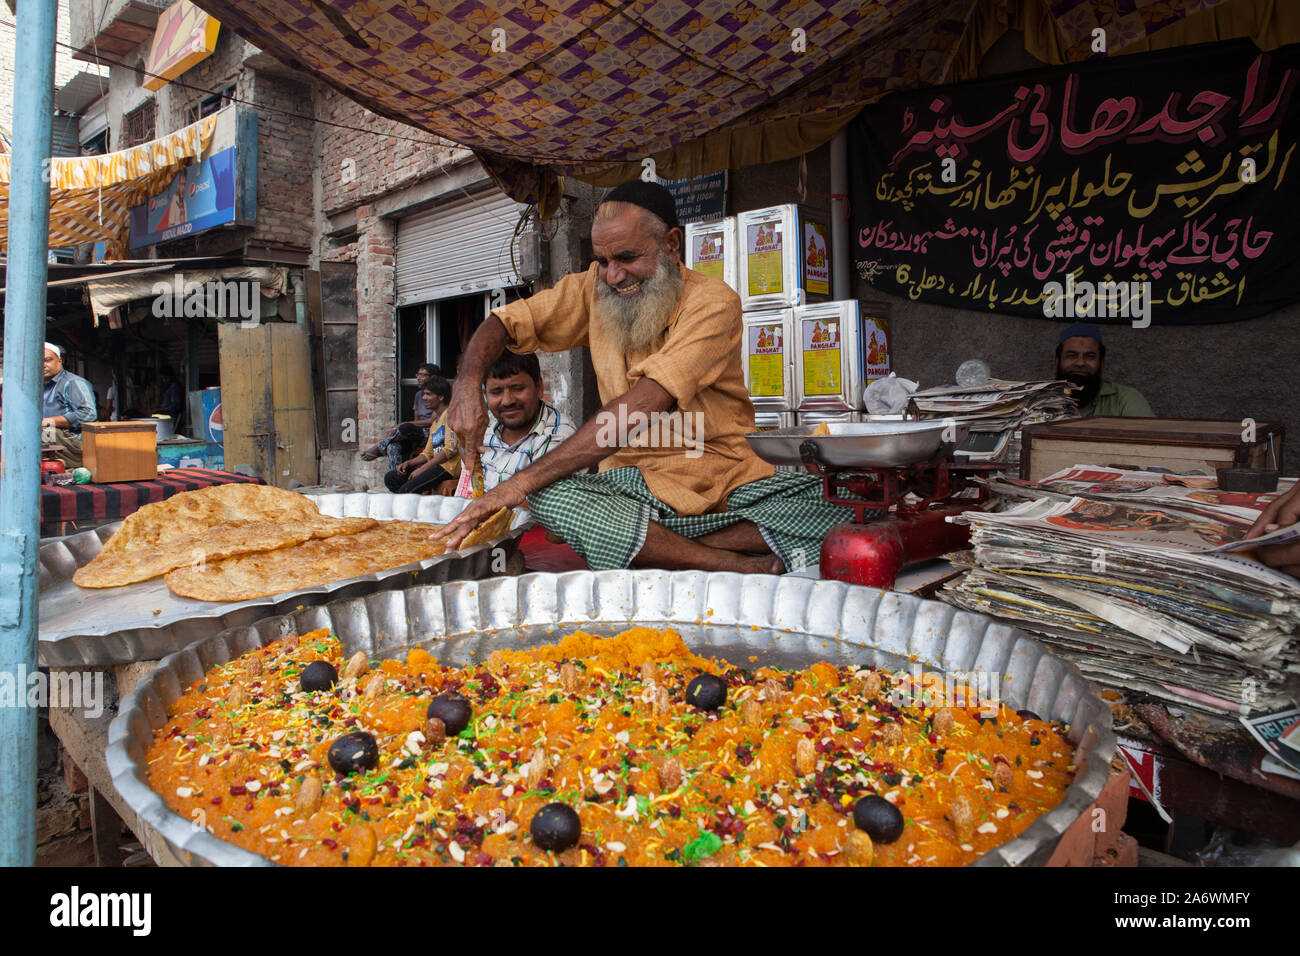 Vendor selling halwa (indian sweet) in the old city of Delhi Stock Photo